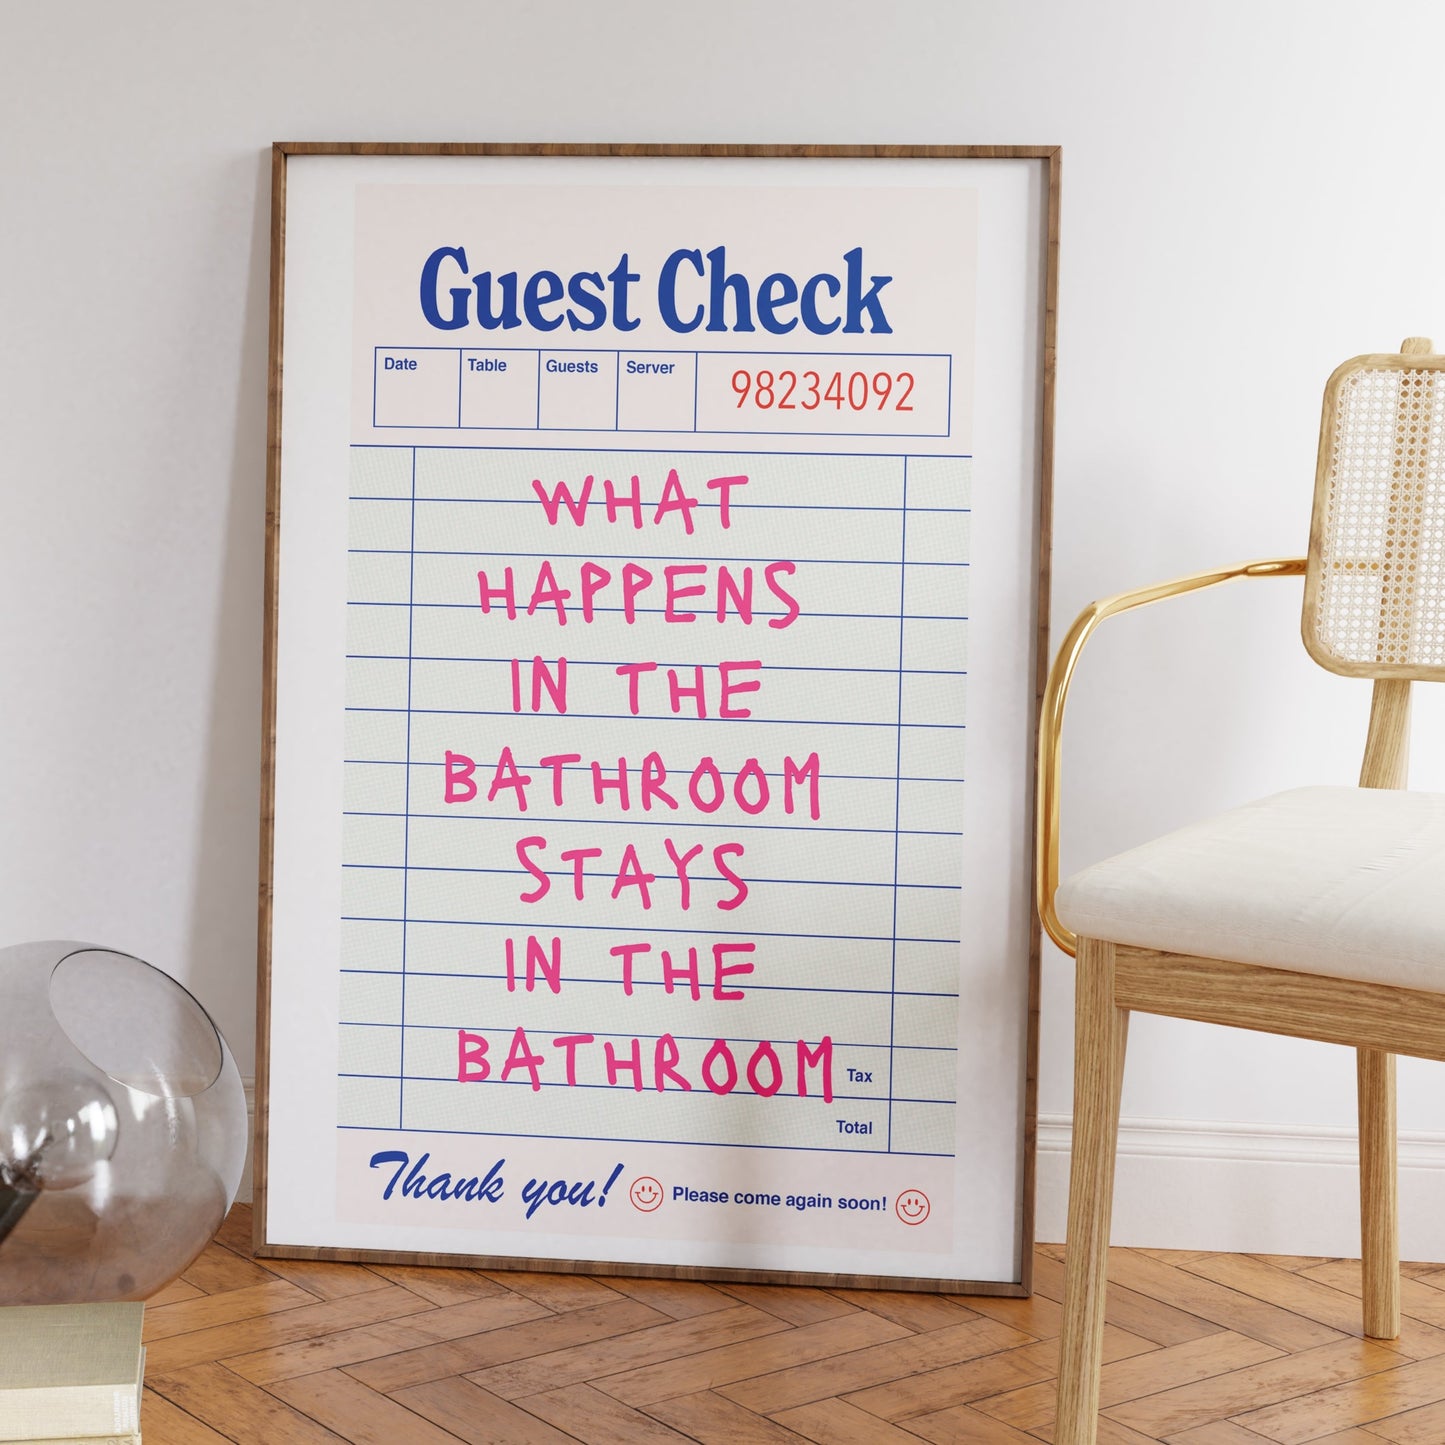 What Happens in the Bathroom Guest Check Poster